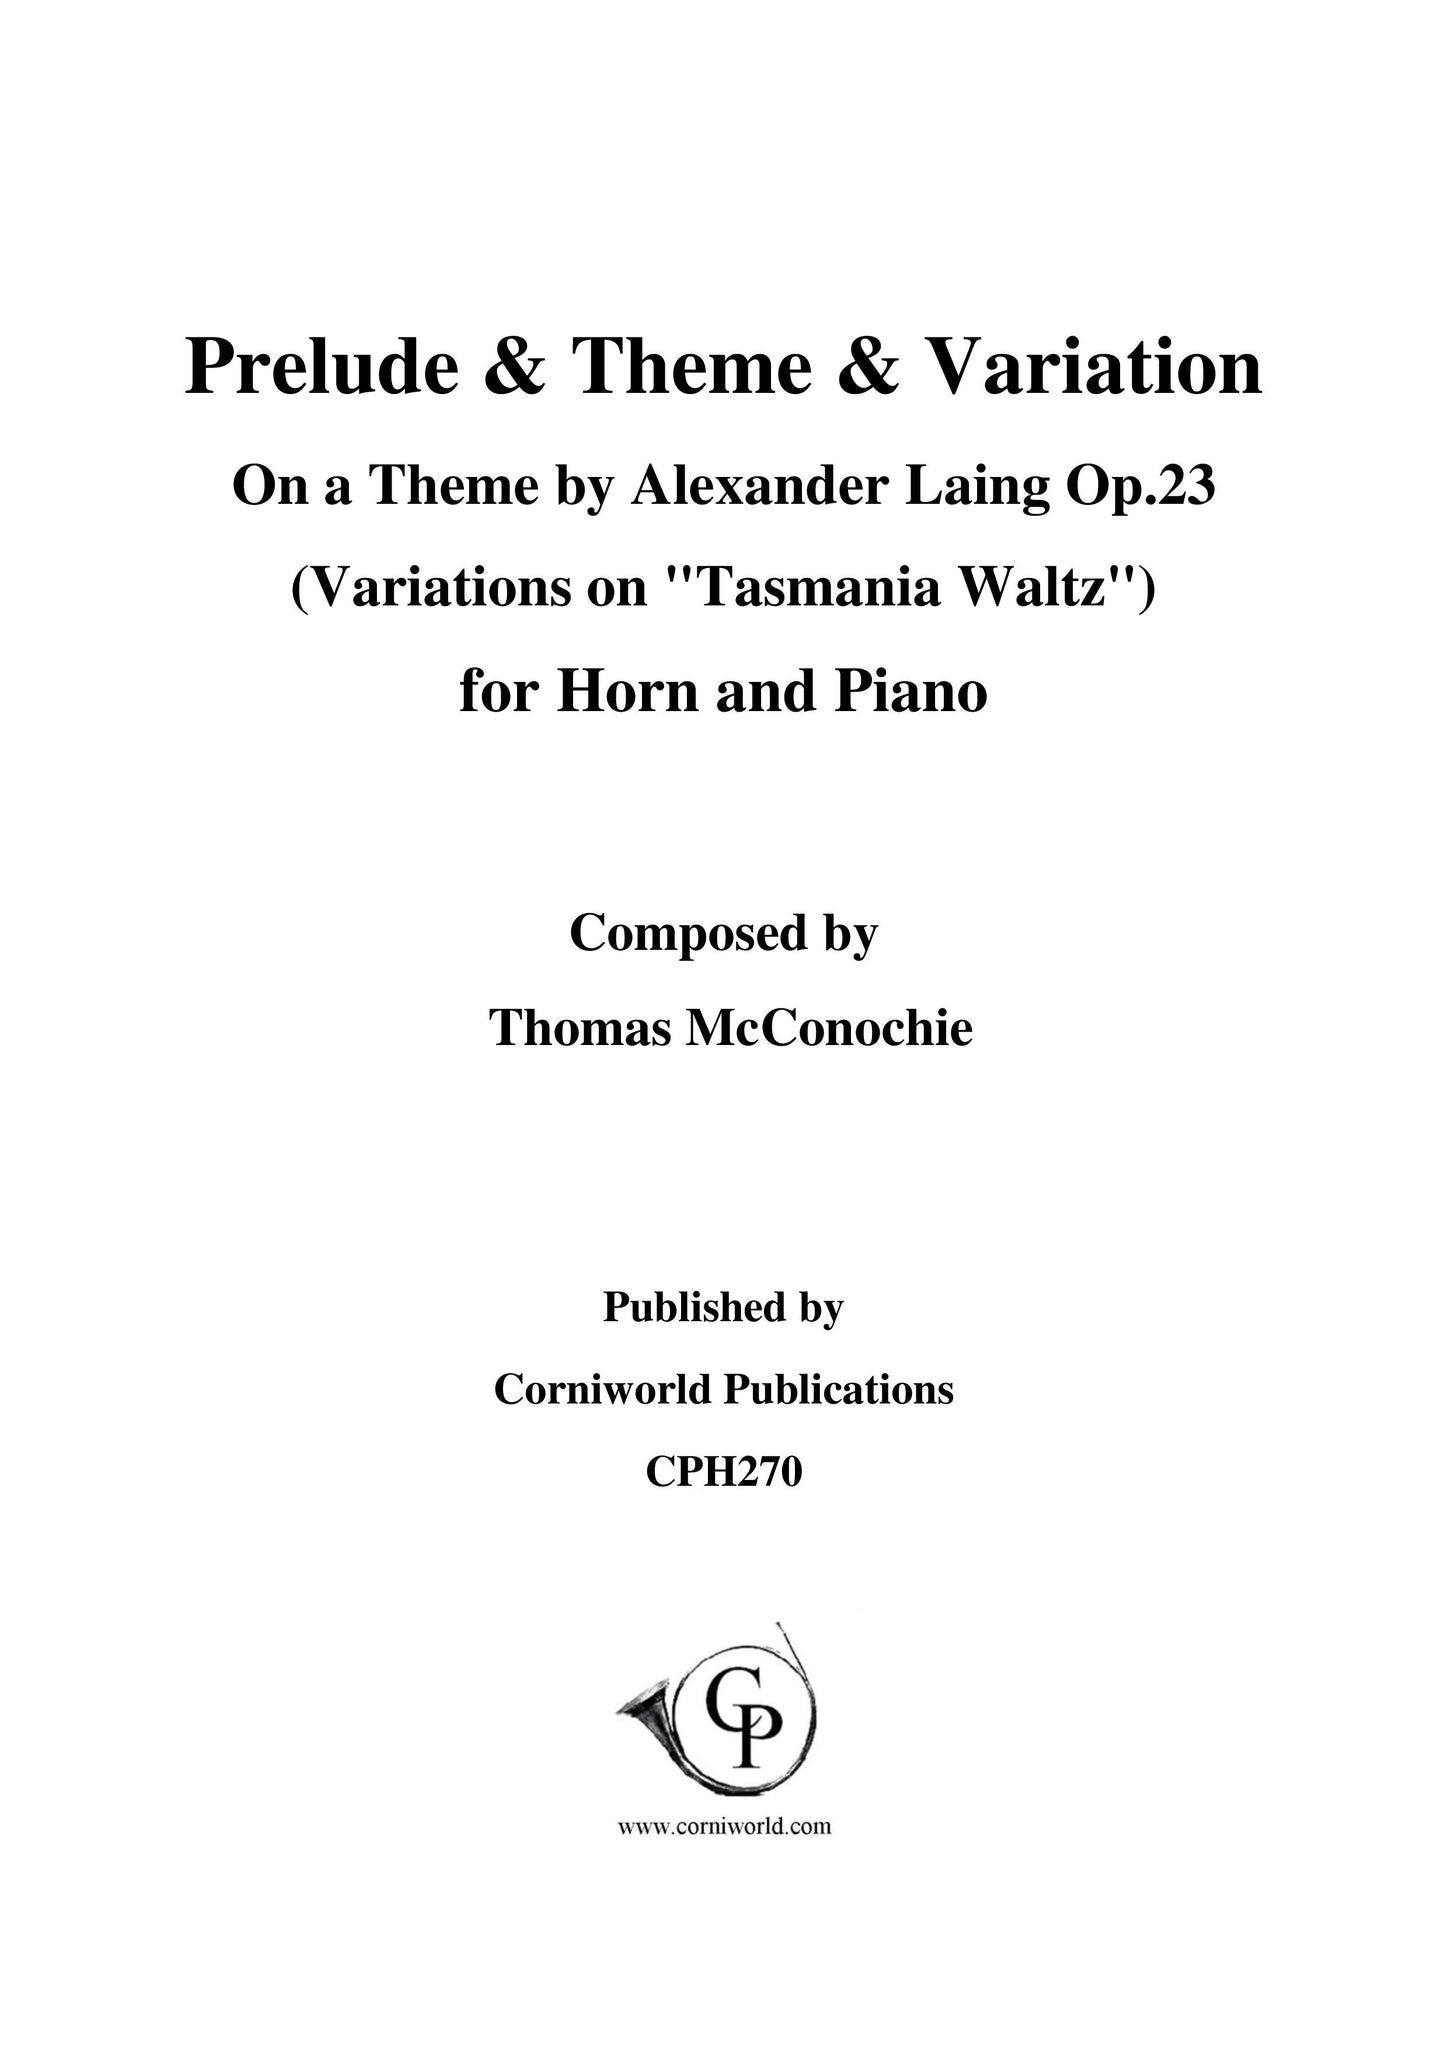 Prelude and Theme and Variations on a Theme by Alexander Laing (Variations on "Tasmania Waltz") Op.23 CPH270